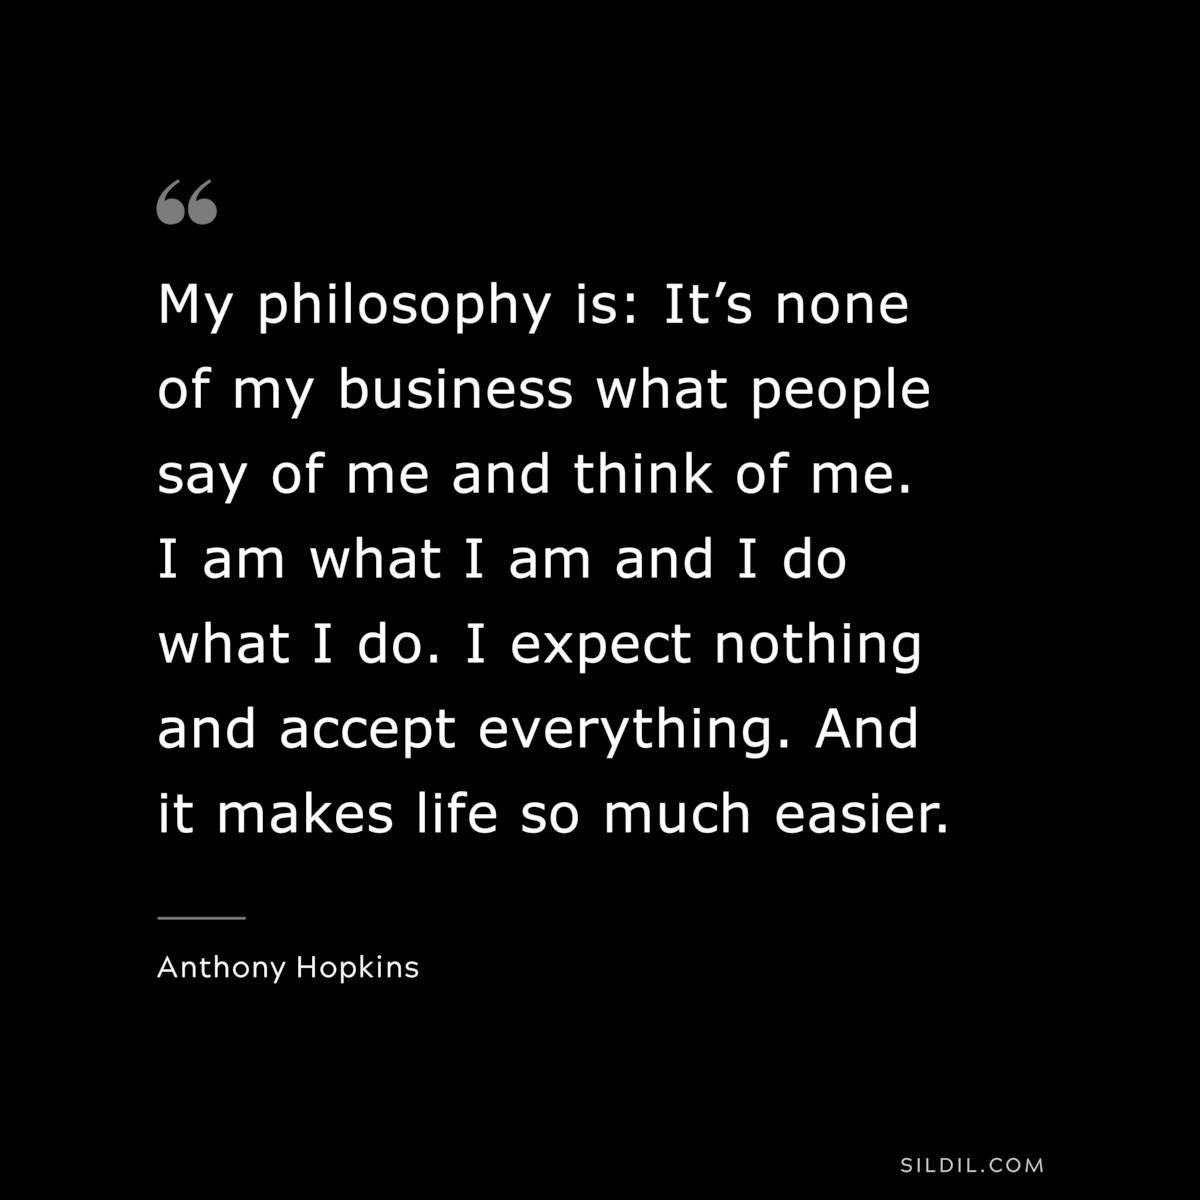 My philosophy is: It’s none of my business what people say of me and think of me. I am what I am and I do what I do. I expect nothing and accept everything. And it makes life so much easier. ― Anthony Hopkins